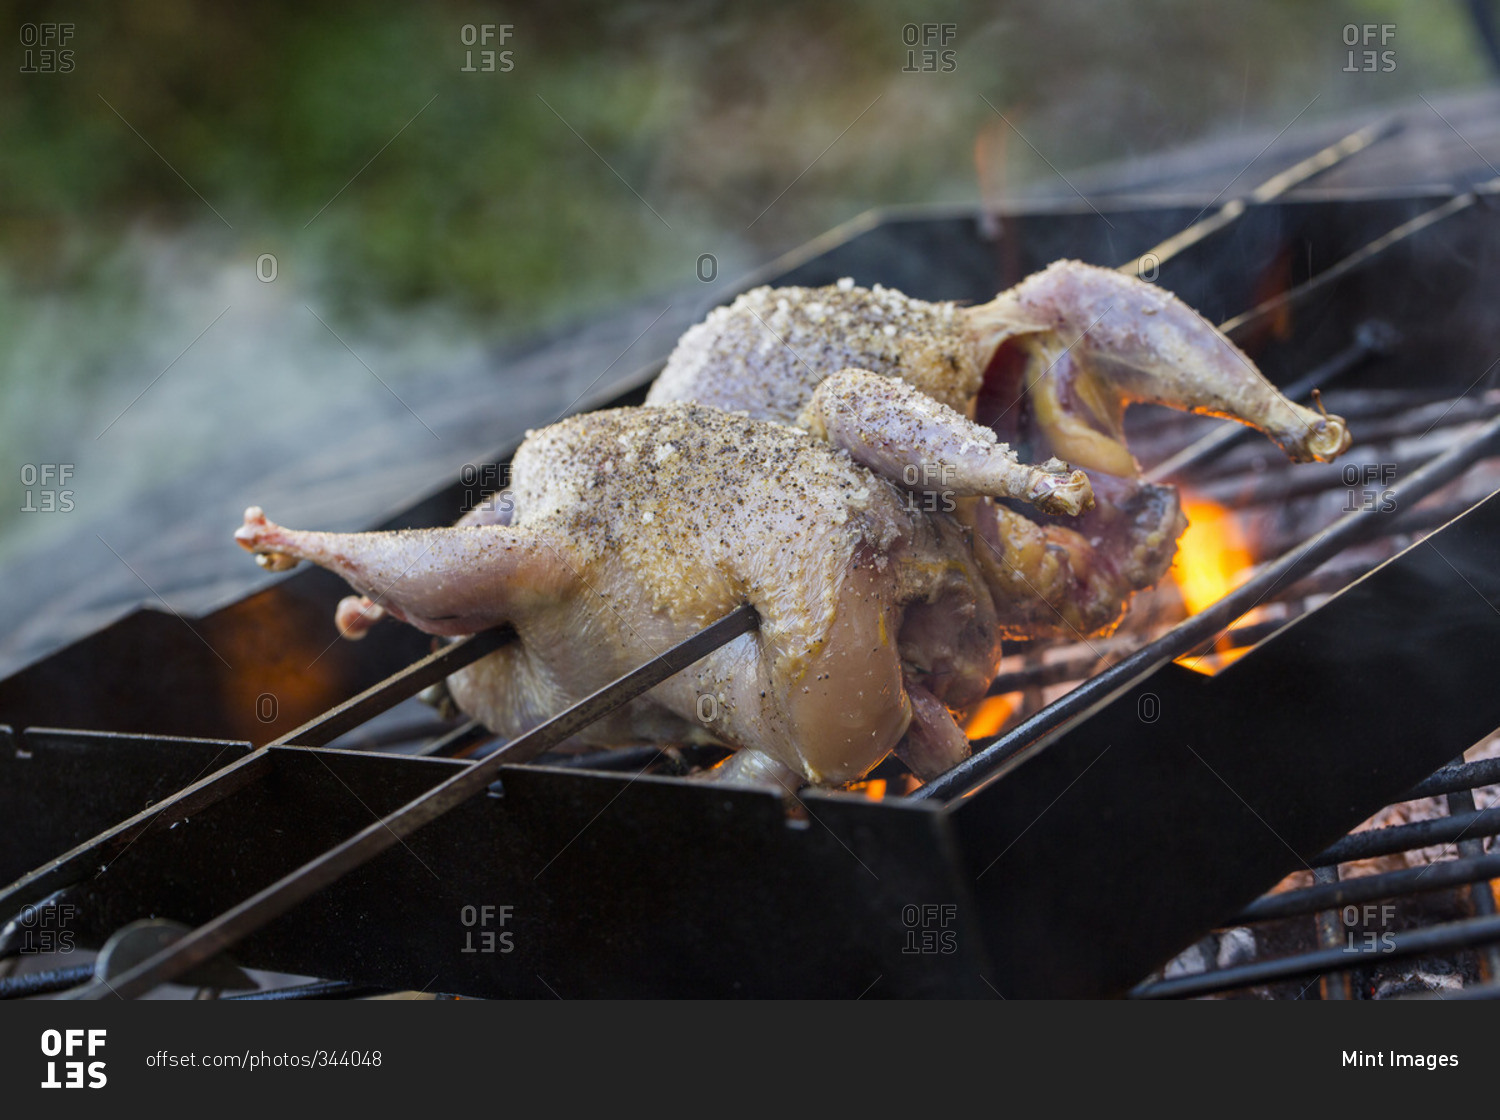 A spatchcocked game bird on skewers roasting on an open fire